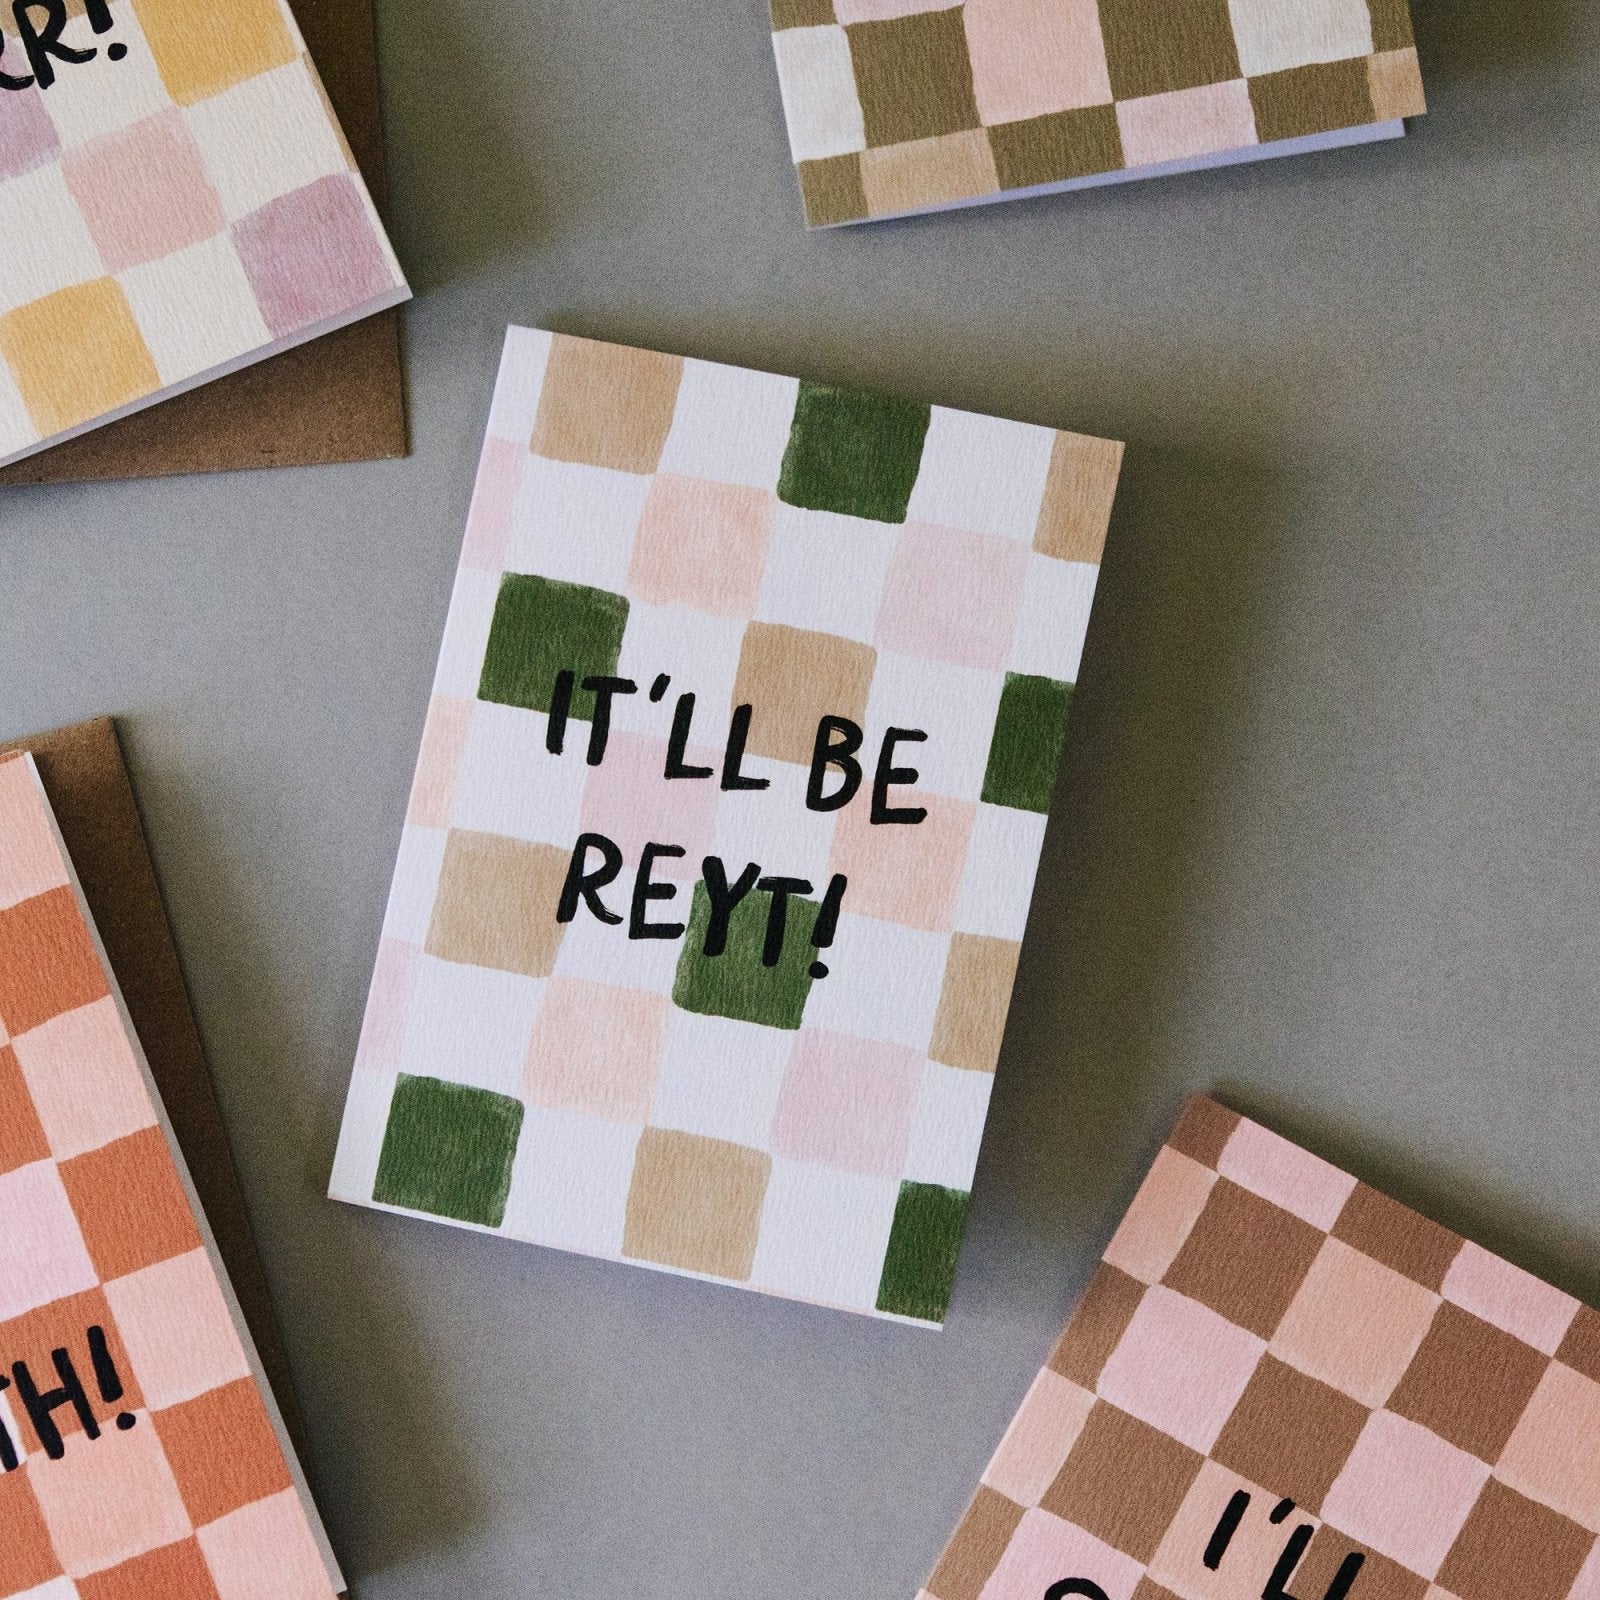 It'll Be Reyt! Yorkshire Dialect Card - I am Nat Ltd - Greeting Card